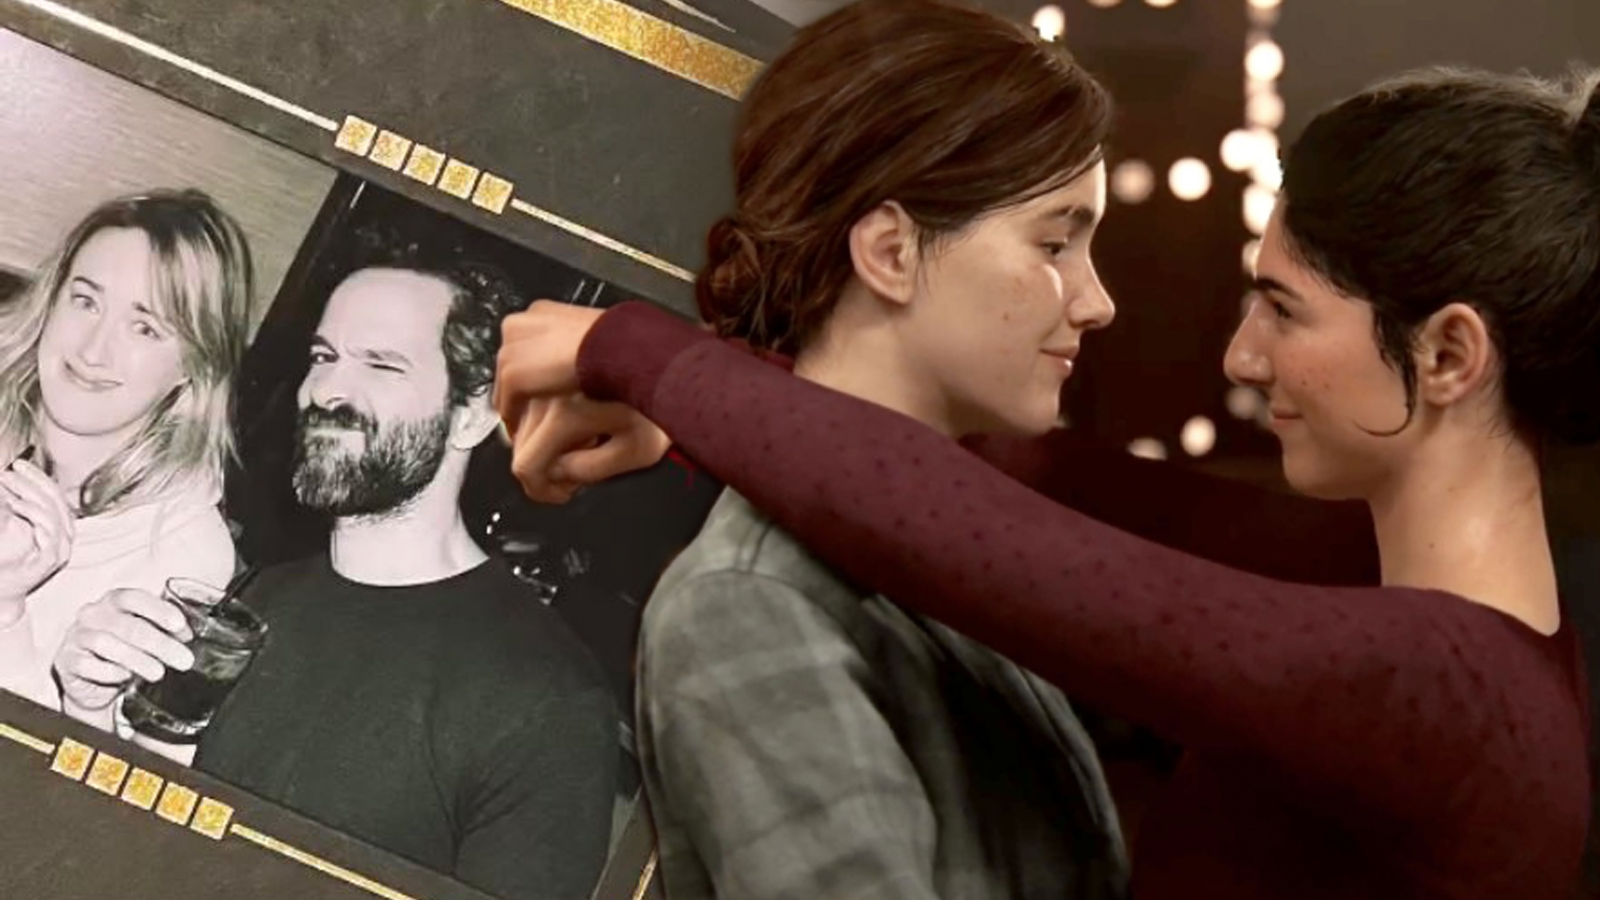 Naughty Dog is probably working on The Last of Us Part 3 - Xfire